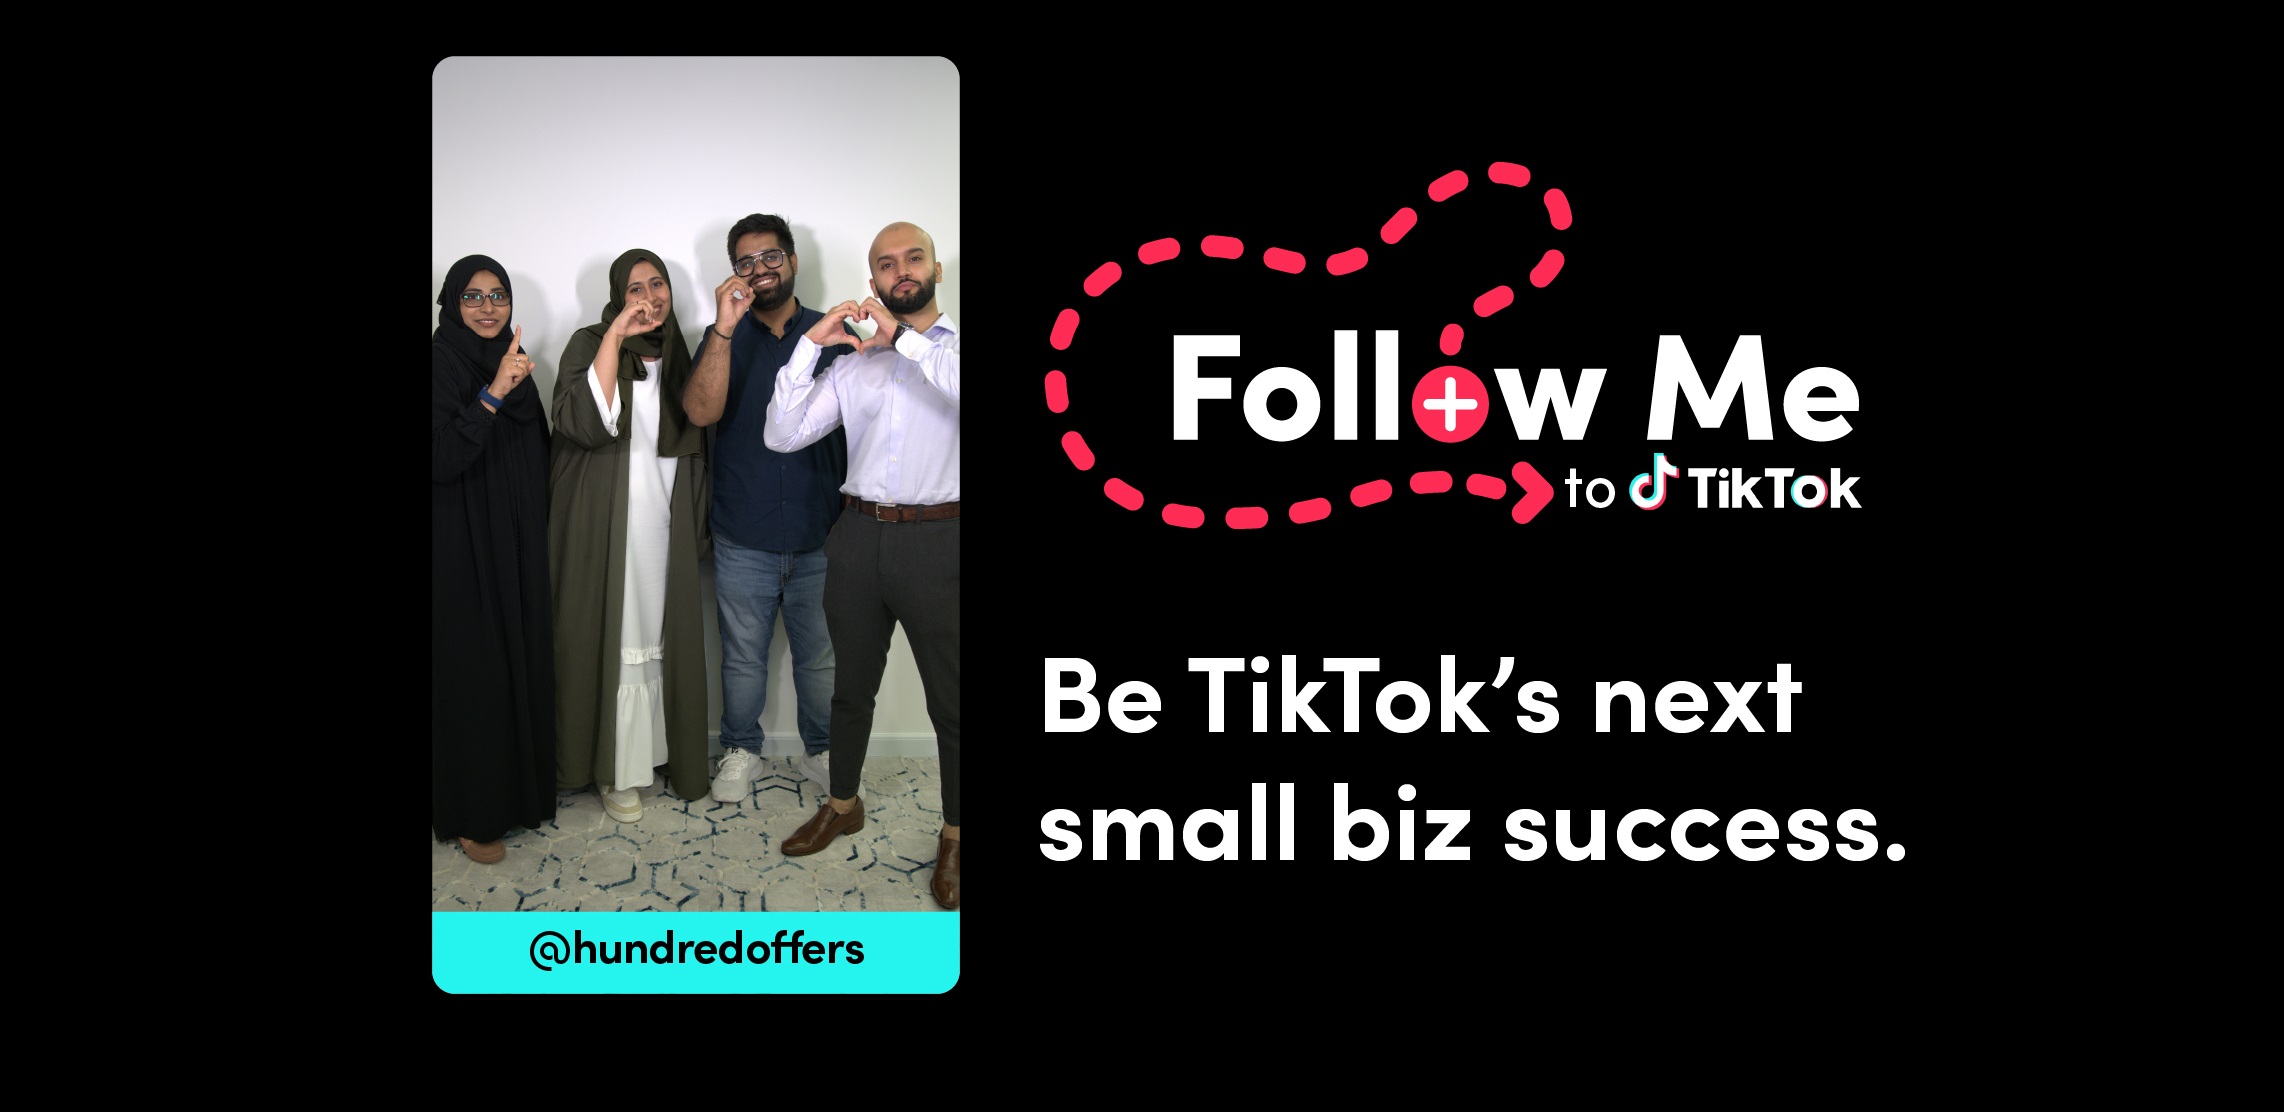 TikTok Introduces 'Follow Me' to Support SMBs